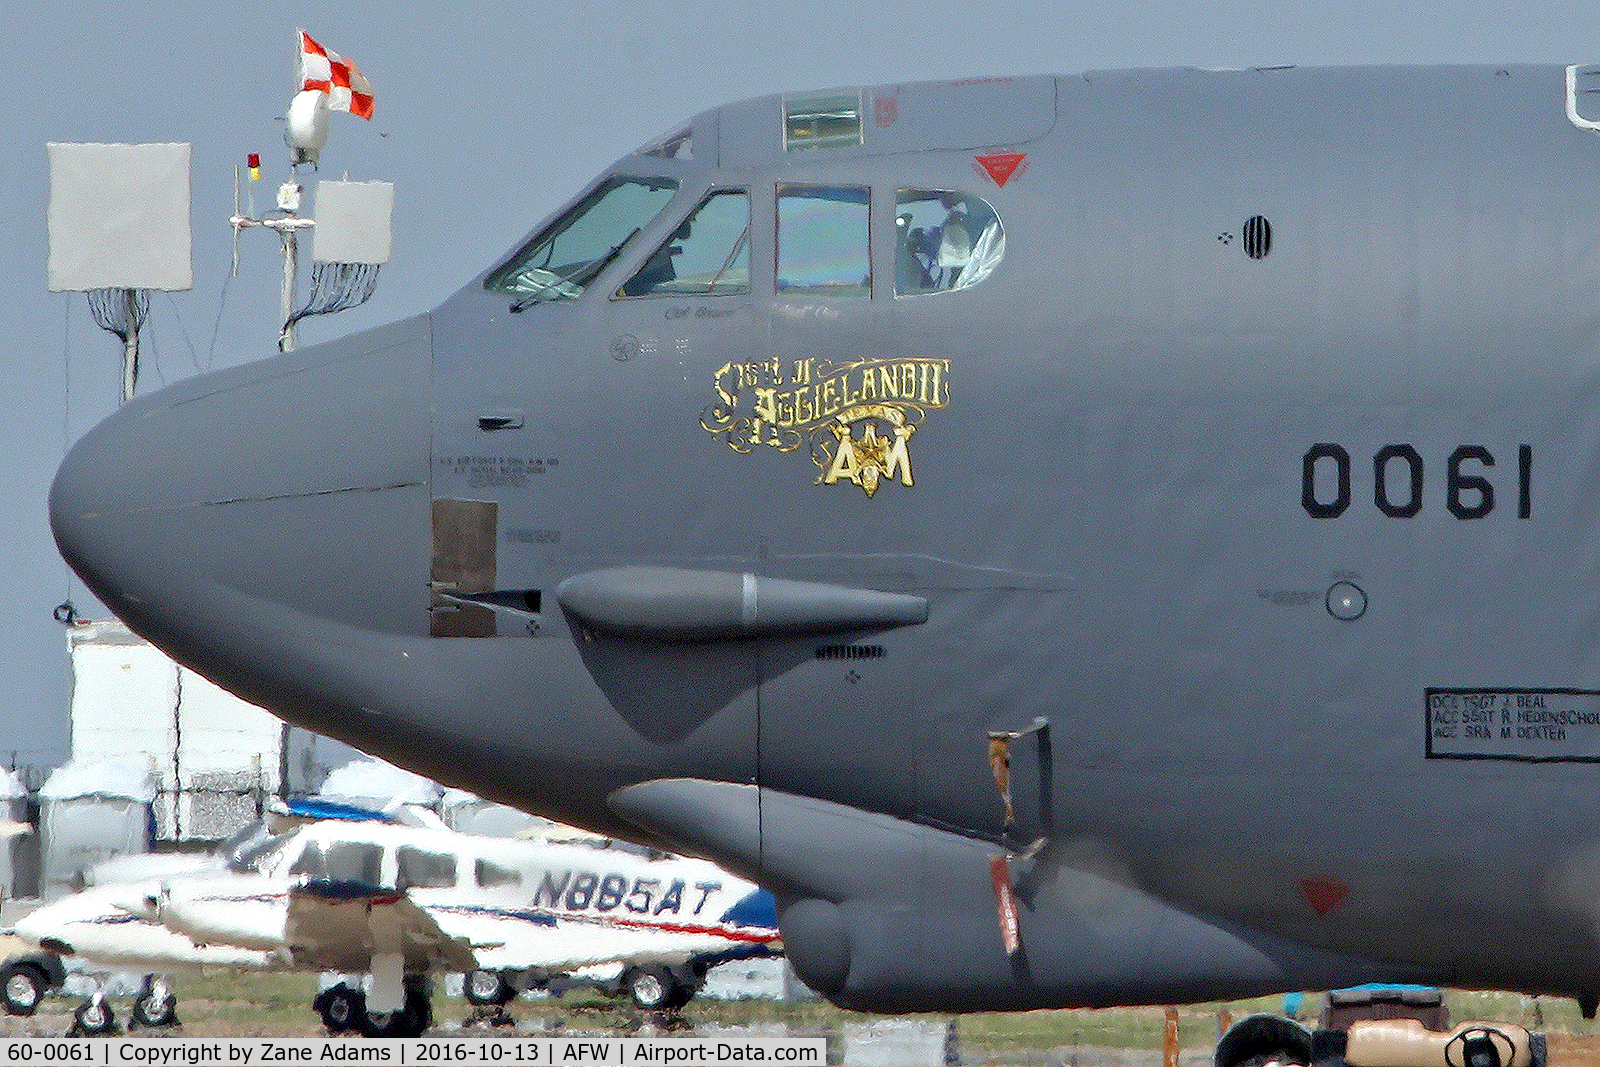 60-0061, 1960 Boeing B-52H Stratofortress C/N 464426, At the 2016 Alliance Airshow - Fort Worth, TX